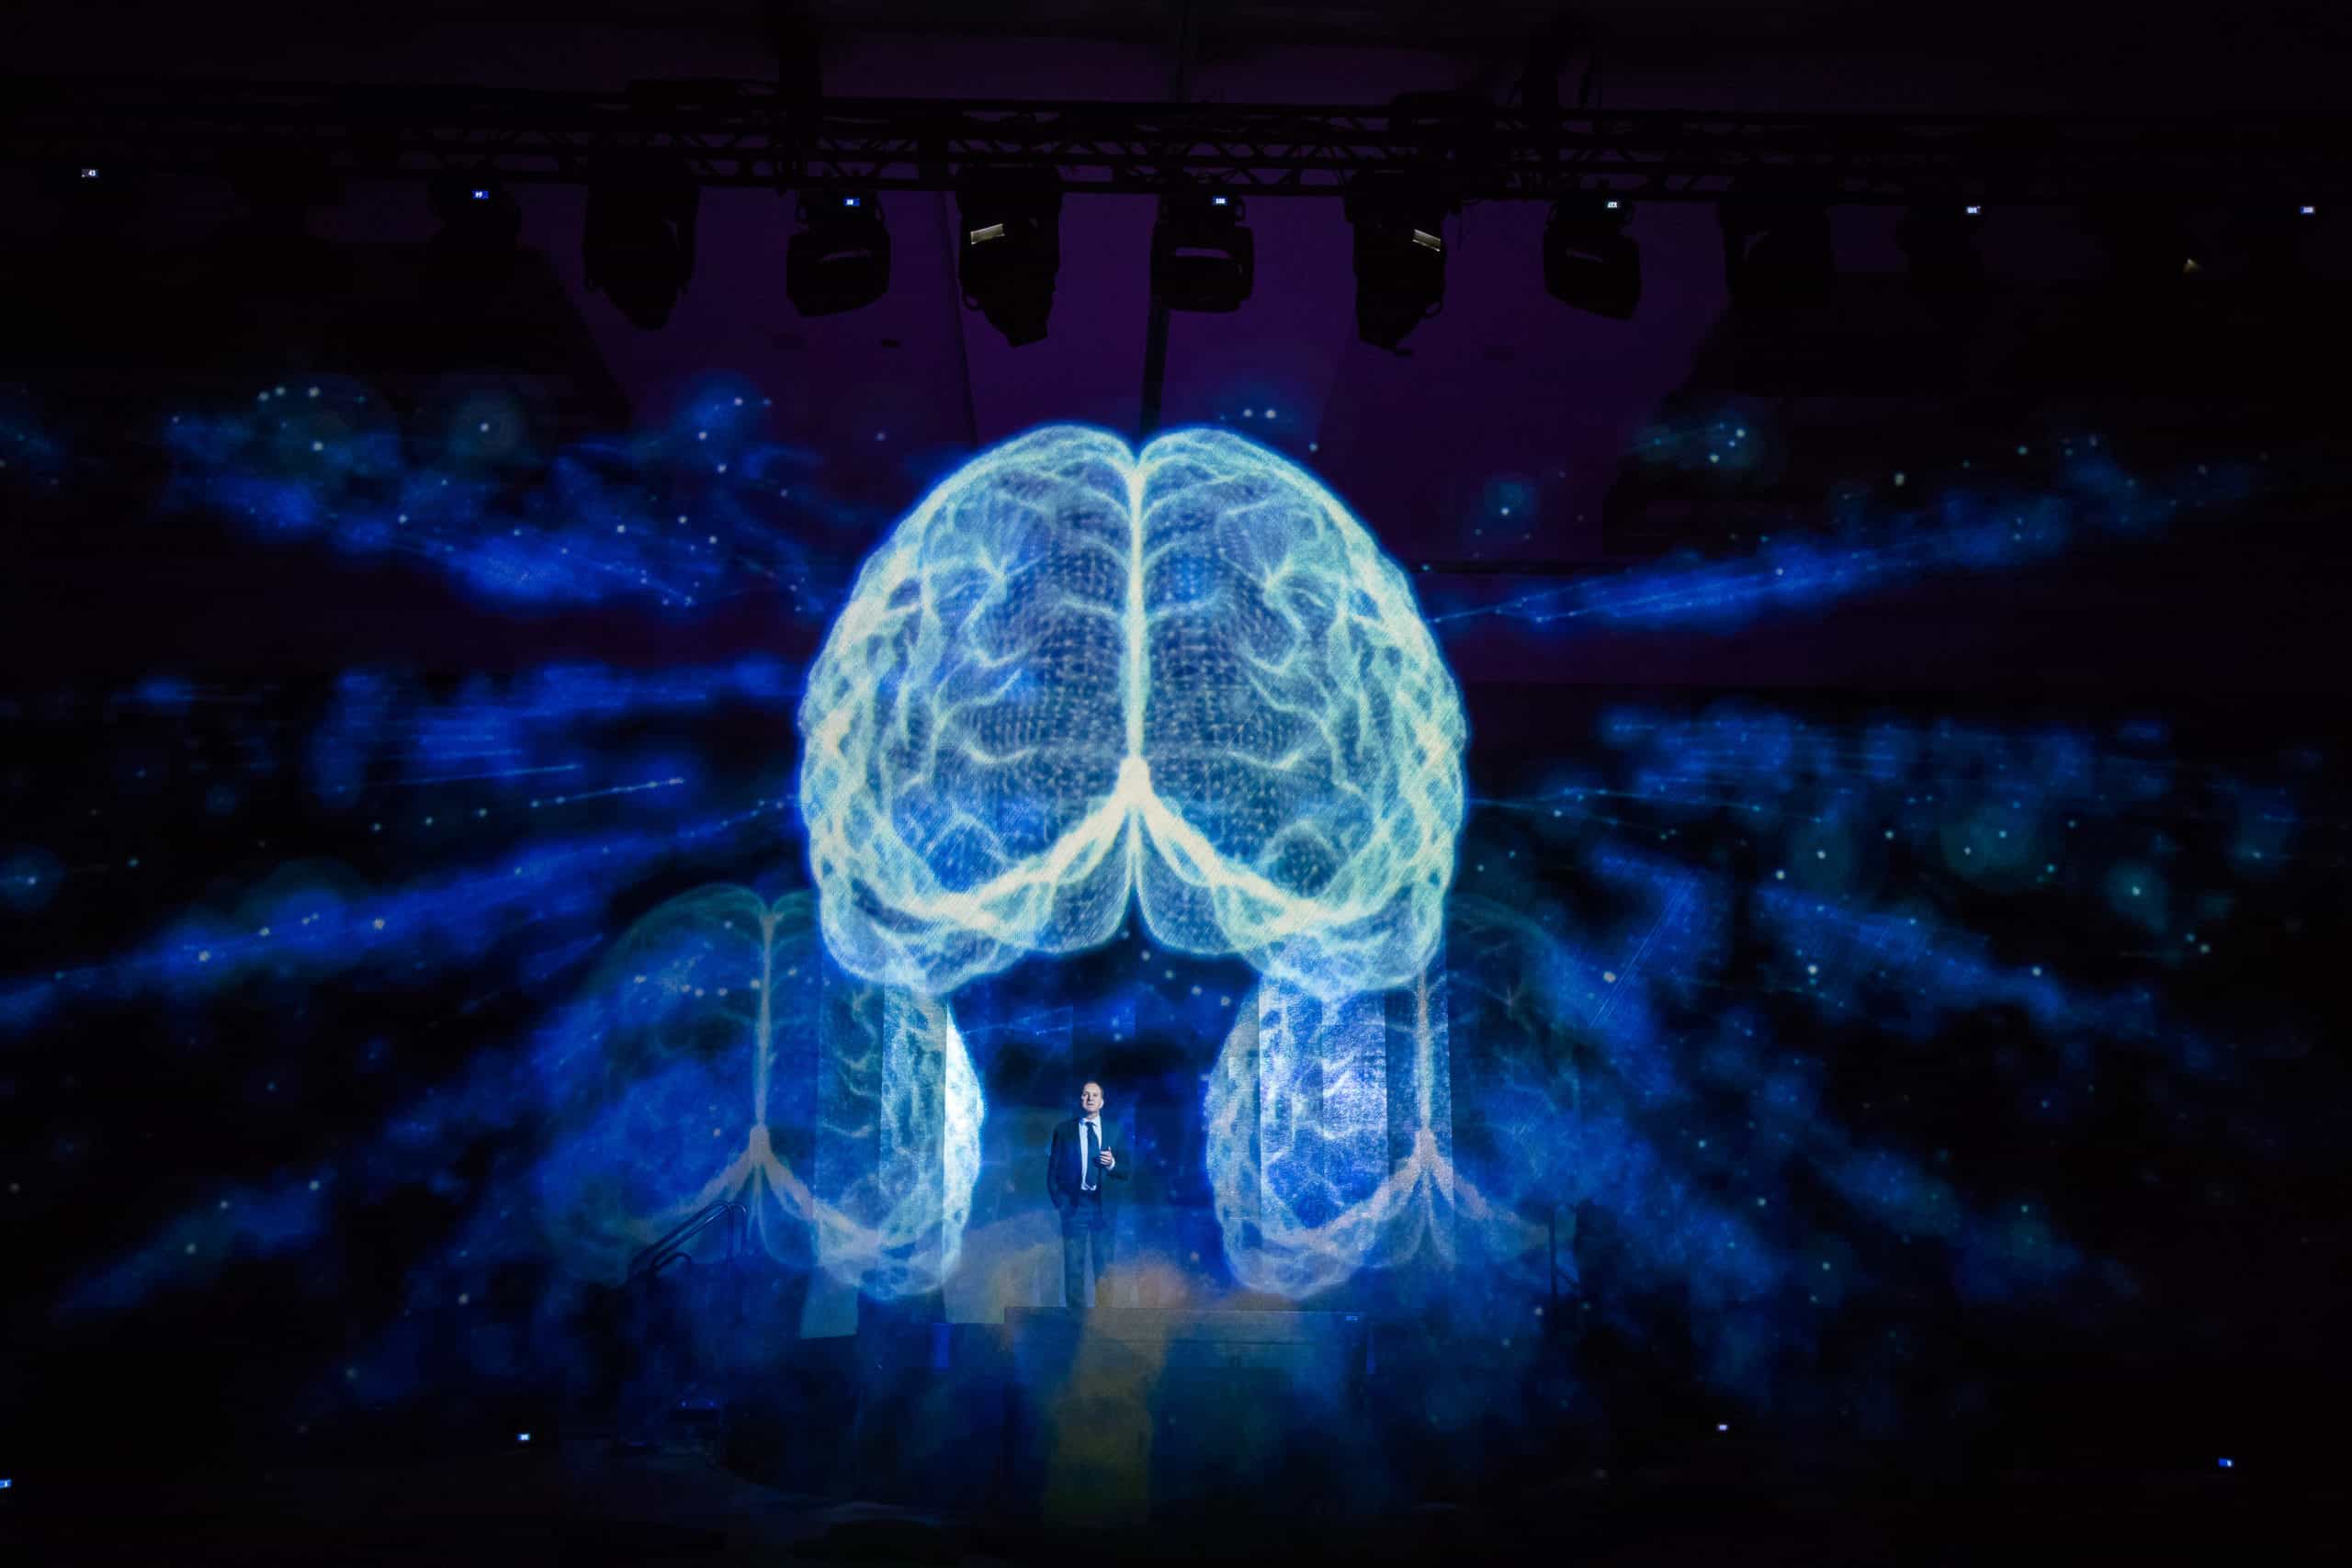 Speaker stands underneath a semi-transparent hologram of a blue human brain at a pharmaceutical industry conference